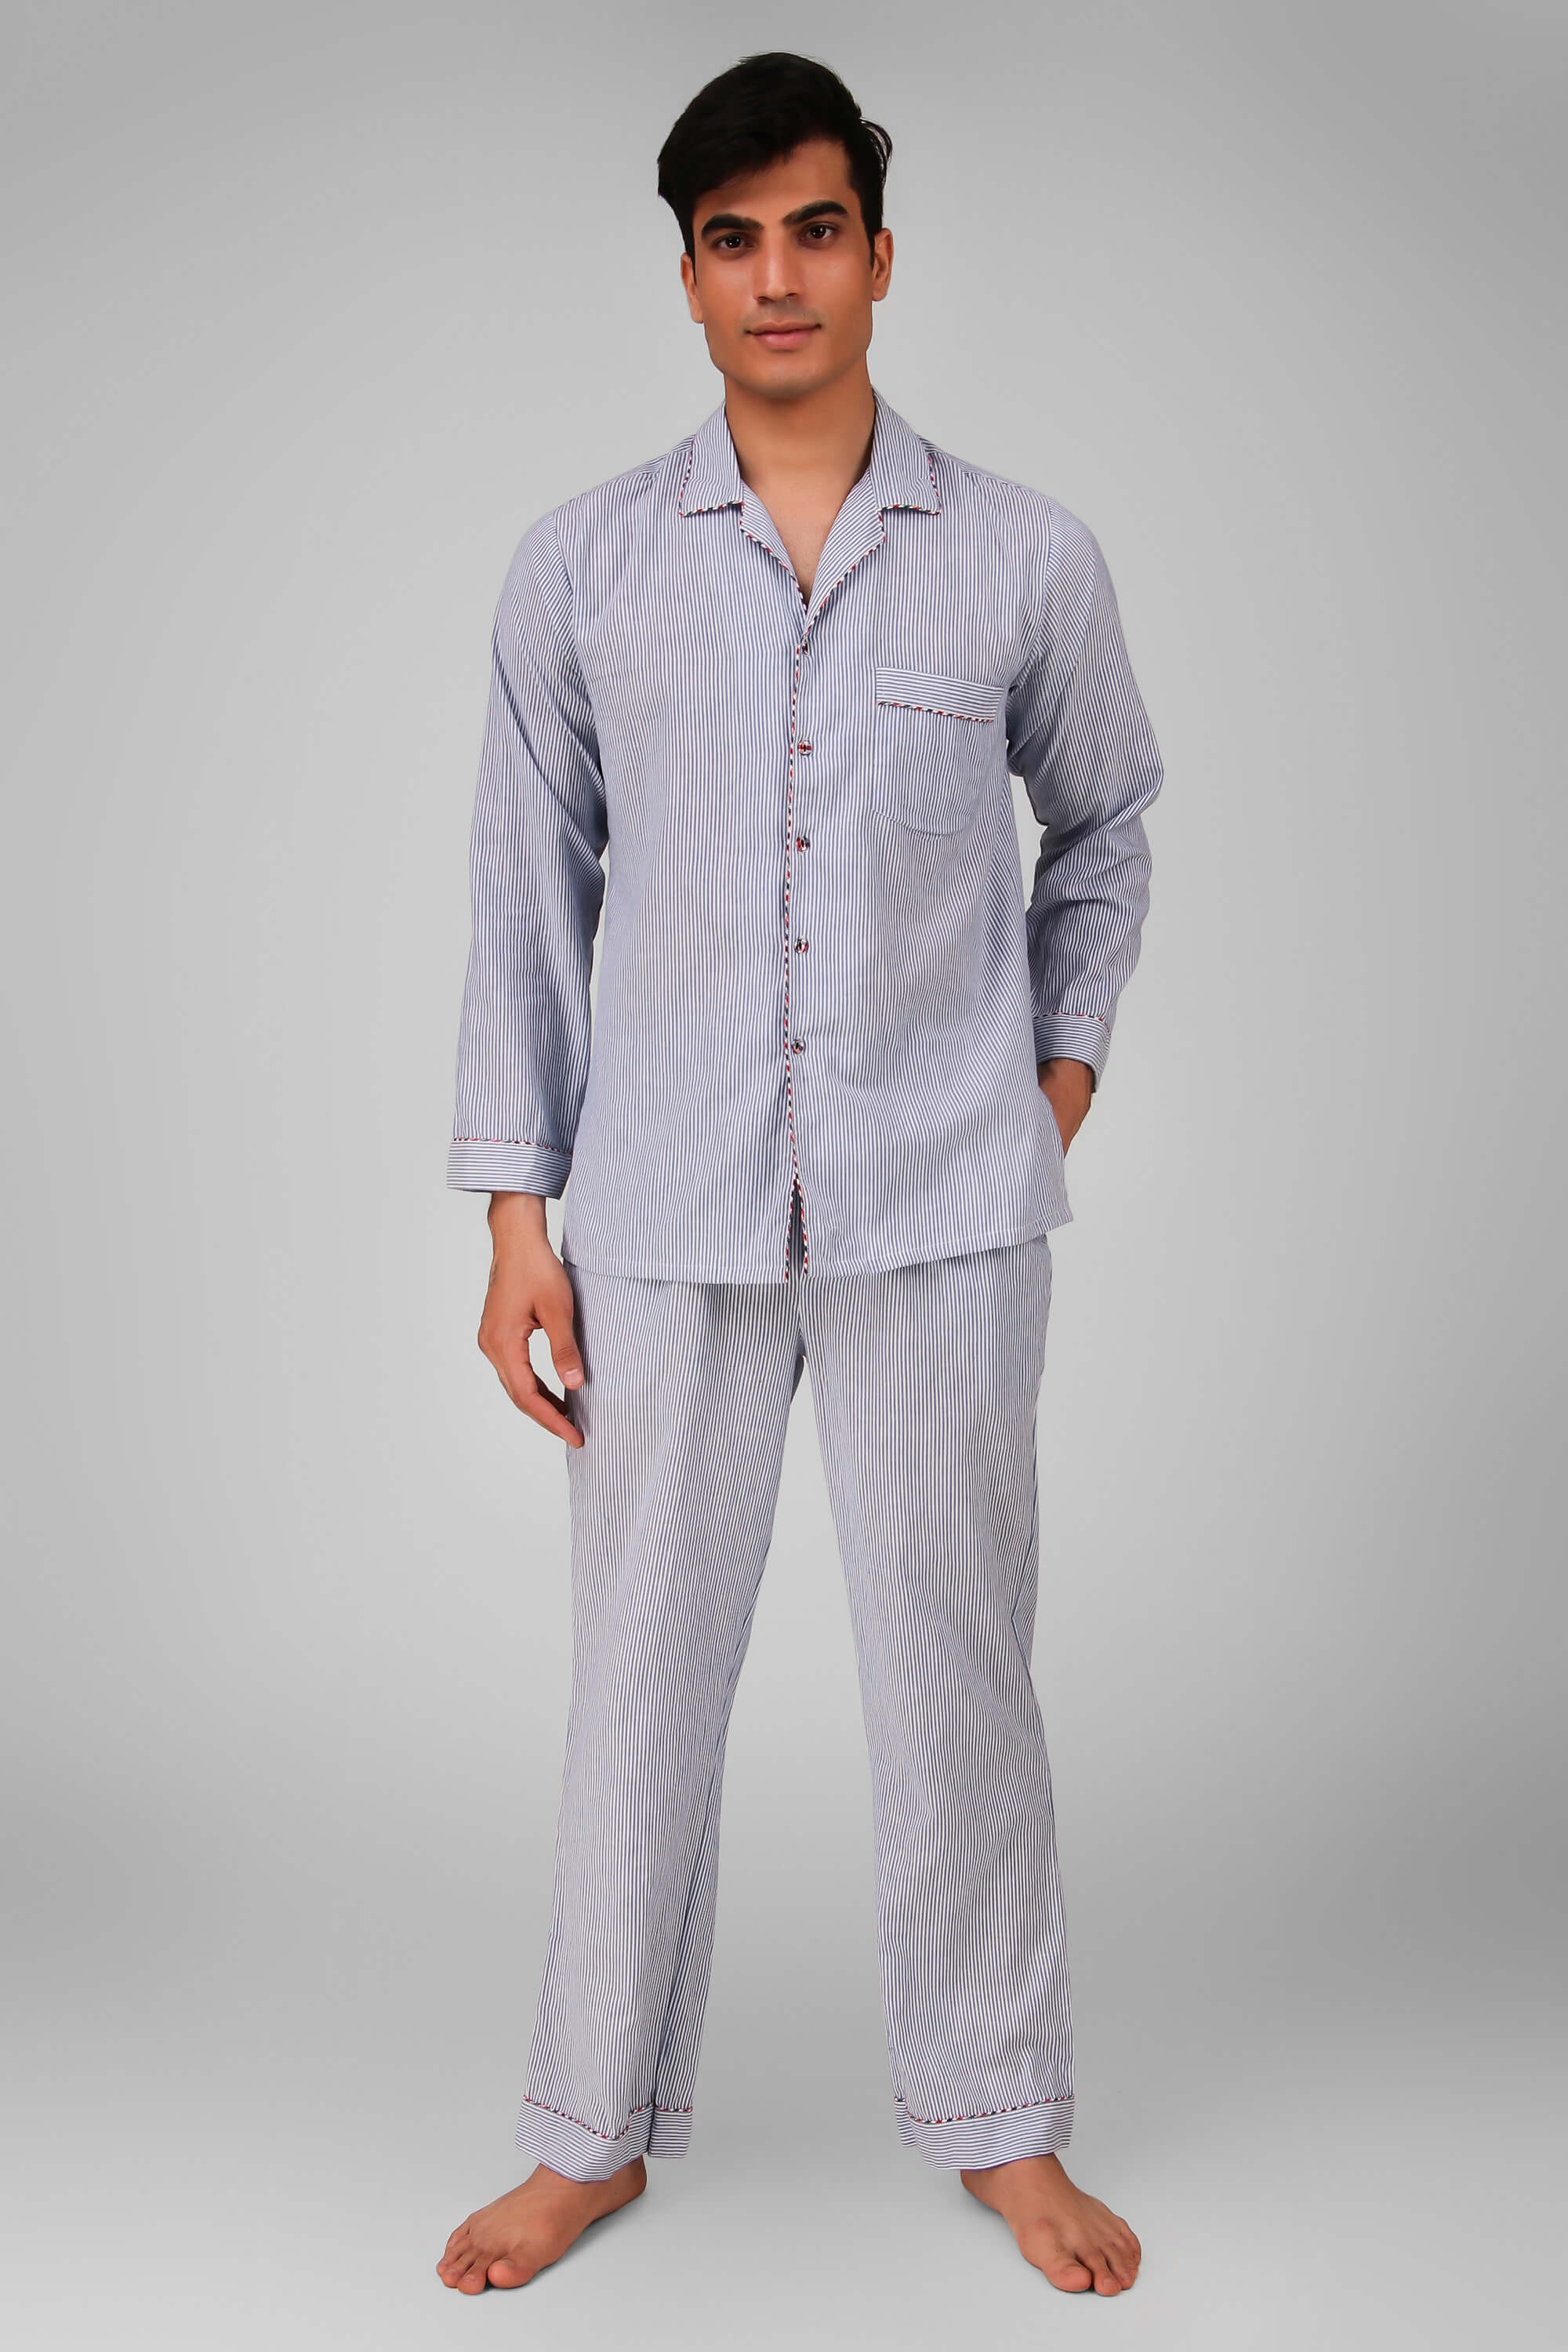 Buy Checked Night Suit & Lounge Wear Sets for Men - Apella